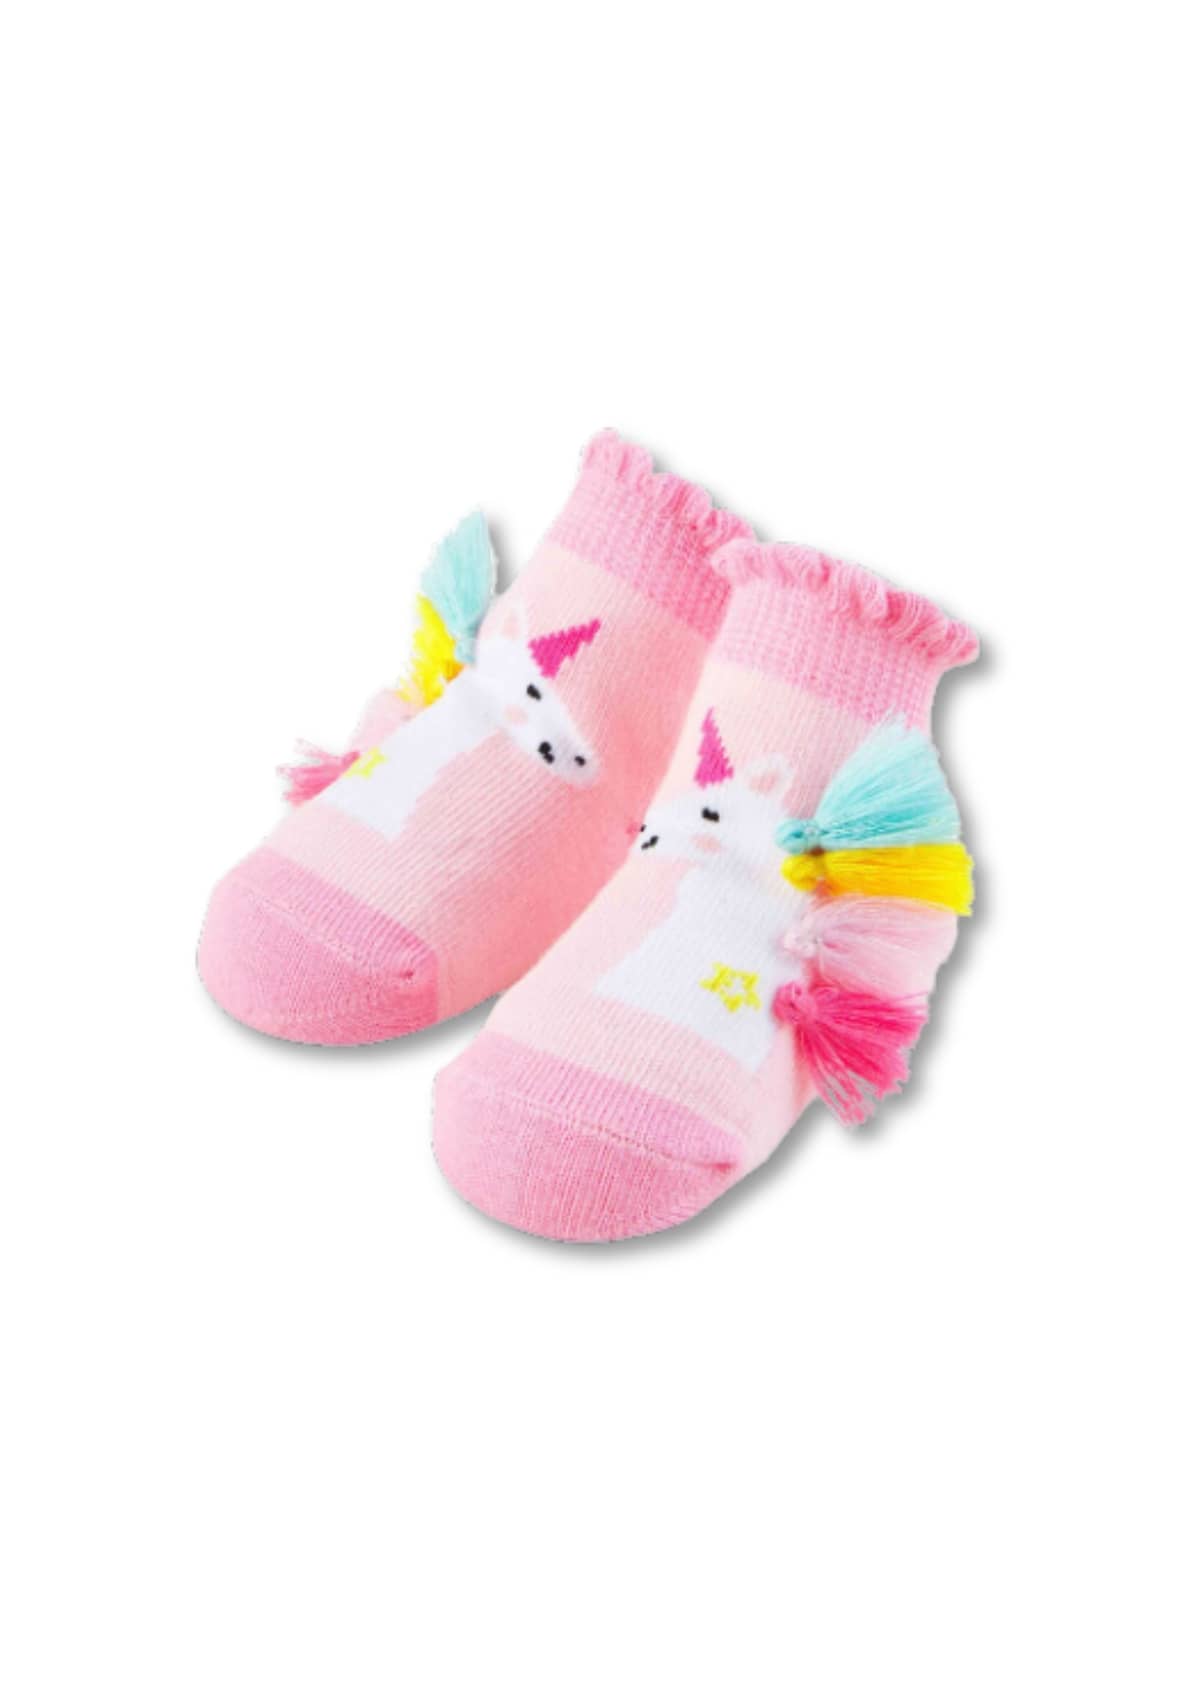 Accessories For the Littles-New Accessories For the Littles-Socks For the Littles-Ruby Jane.